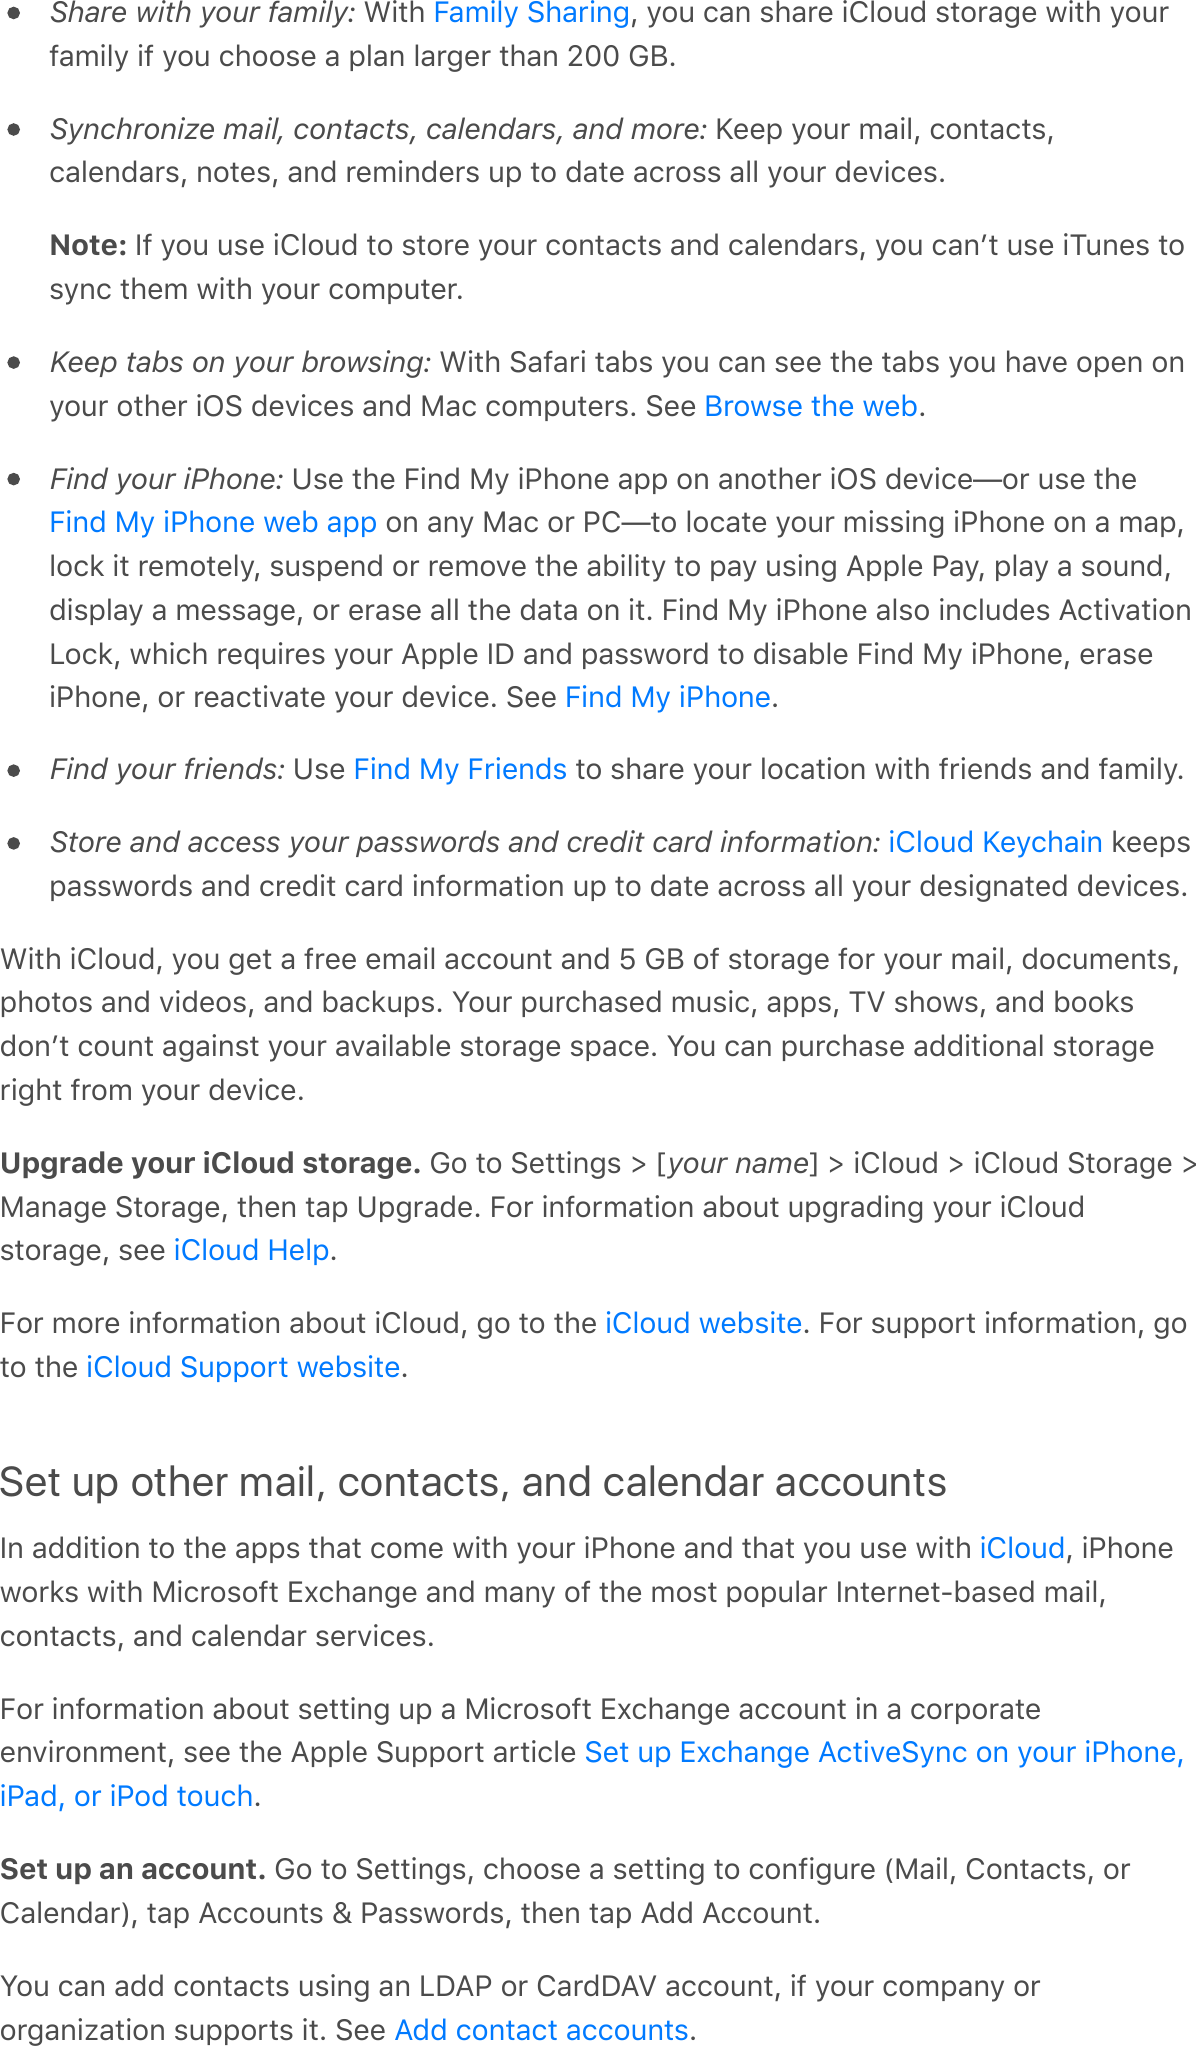 Share with your family: With  , you can share iCloud storage with yourfamily if you choose a plan larger than 200 GB.Synchronize mail, contacts, calendars, and more: Keep your mail, contacts,calendars, notes, and reminders up to date across all your devices.Note: If you use iCloud to store your contacts and calendars, you canʼt use iTunes tosync them with your computer.Keep tabs on your browsing: With Safari tabs you can see the tabs you have open onyour other iOS devices and Mac computers. See  .Find your iPhone: Use the Find My iPhone app on another iOS device—or use the on any Mac or PC—to locate your missing iPhone on a map,lock it remotely, suspend or remove the ability to pay using Apple Pay, play a sound,display a message, or erase all the data on it. Find My iPhone also includes ActivationLock, which requires your Apple ID and password to disable Find My iPhone, eraseiPhone, or reactivate your device. See  .Find your friends: Use   to share your location with friends and family.Store and access your passwords and credit card information:   keepspasswords and credit card information up to date across all your designated devices.With iCloud, you get a free email account and 5 GB of storage for your mail, documents,photos and videos, and backups. Your purchased music, apps, TV shows, and booksdonʼt count against your available storage space. You can purchase additional storageright from your device.Upgrade your iCloud storage. Go to Settings &gt; [your name] &gt; iCloud &gt; iCloud Storage &gt;Manage Storage, then tap Upgrade. For information about upgrading your iCloudstorage, see  .For more information about iCloud, go to the  . For support information, goto the  .Set up other mail, contacts, and calendar accountsIn addition to the apps that come with your iPhone and that you use with  , iPhoneworks with Microsoft Exchange and many of the most popular Internet-based mail,contacts, and calendar services.For information about setting up a Microsoft Exchange account in a corporateenvironment, see the Apple Support article .Set up an account. Go to Settings, choose a setting to configure (Mail, Contacts, orCalendar), tap Accounts &amp; Passwords, then tap Add Account.You can add contacts using an LDAP or CardDAV account, if your company ororganization supports it. See  .Family SharingBrowse the webFind My iPhone web appFind My iPhoneFind My FriendsiCloud KeychainiCloud HelpiCloud websiteiCloud Support websiteiCloudSet up Exchange ActiveSync on your iPhone,iPad, or iPod touchAdd contact accounts